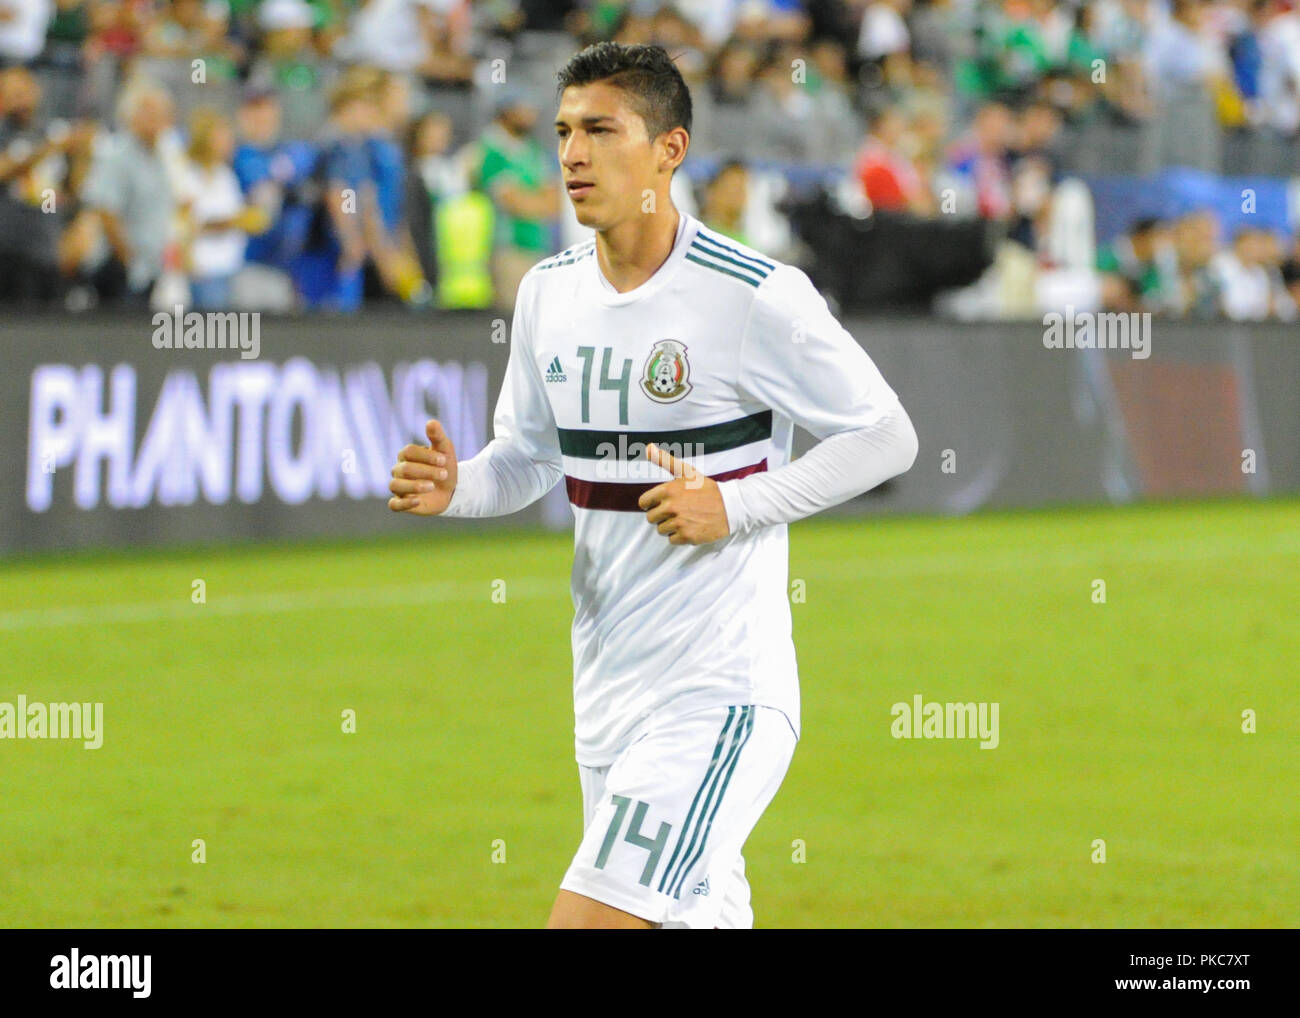 Nashville, TN, USA. 11th Sep, 2018. Mexico forward, Angel Zaldivar (14), leaves the field after being injured in the International Friendly match between Mexico and USA at Nissan Stadium in Nashville, TN. The US National team defeated Mexico, 1-0. Kevin Langley/CSM/Alamy Live News Stock Photo